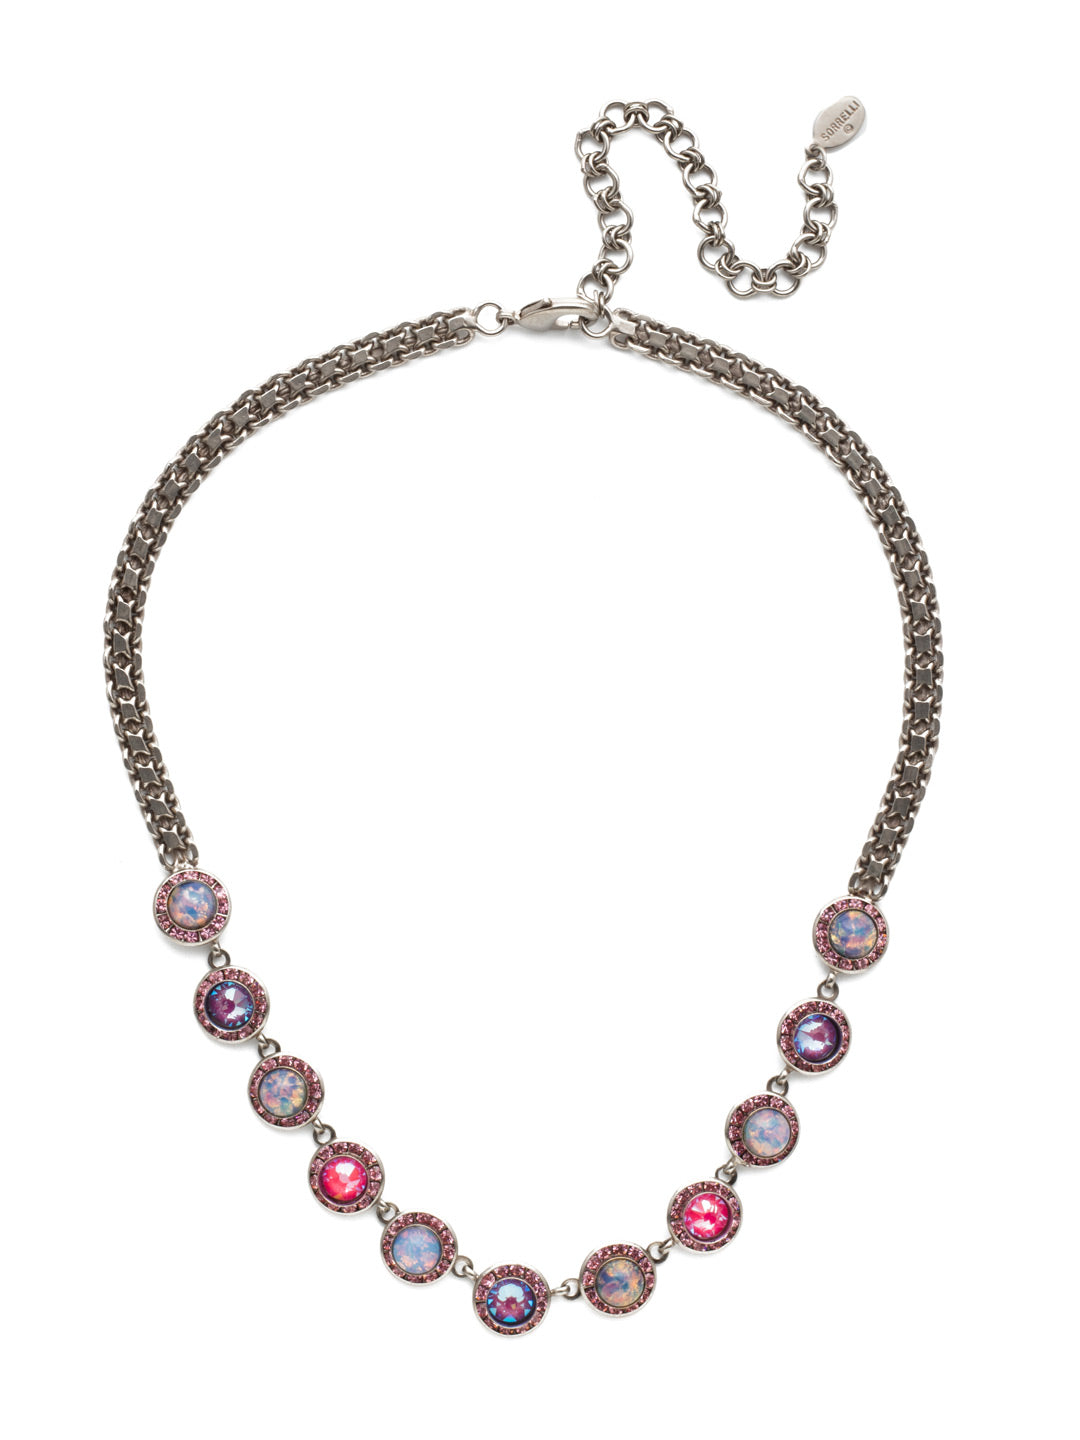 Kaia Statement Necklace - NET10ASETP - The Kaia Statement Necklace is bold with its chunky chainmetal strand that gives way to irredescent gems rimmed in stunning, sparkling crystals. From Sorrelli's Electric Pink collection in our Antique Silver-tone finish.